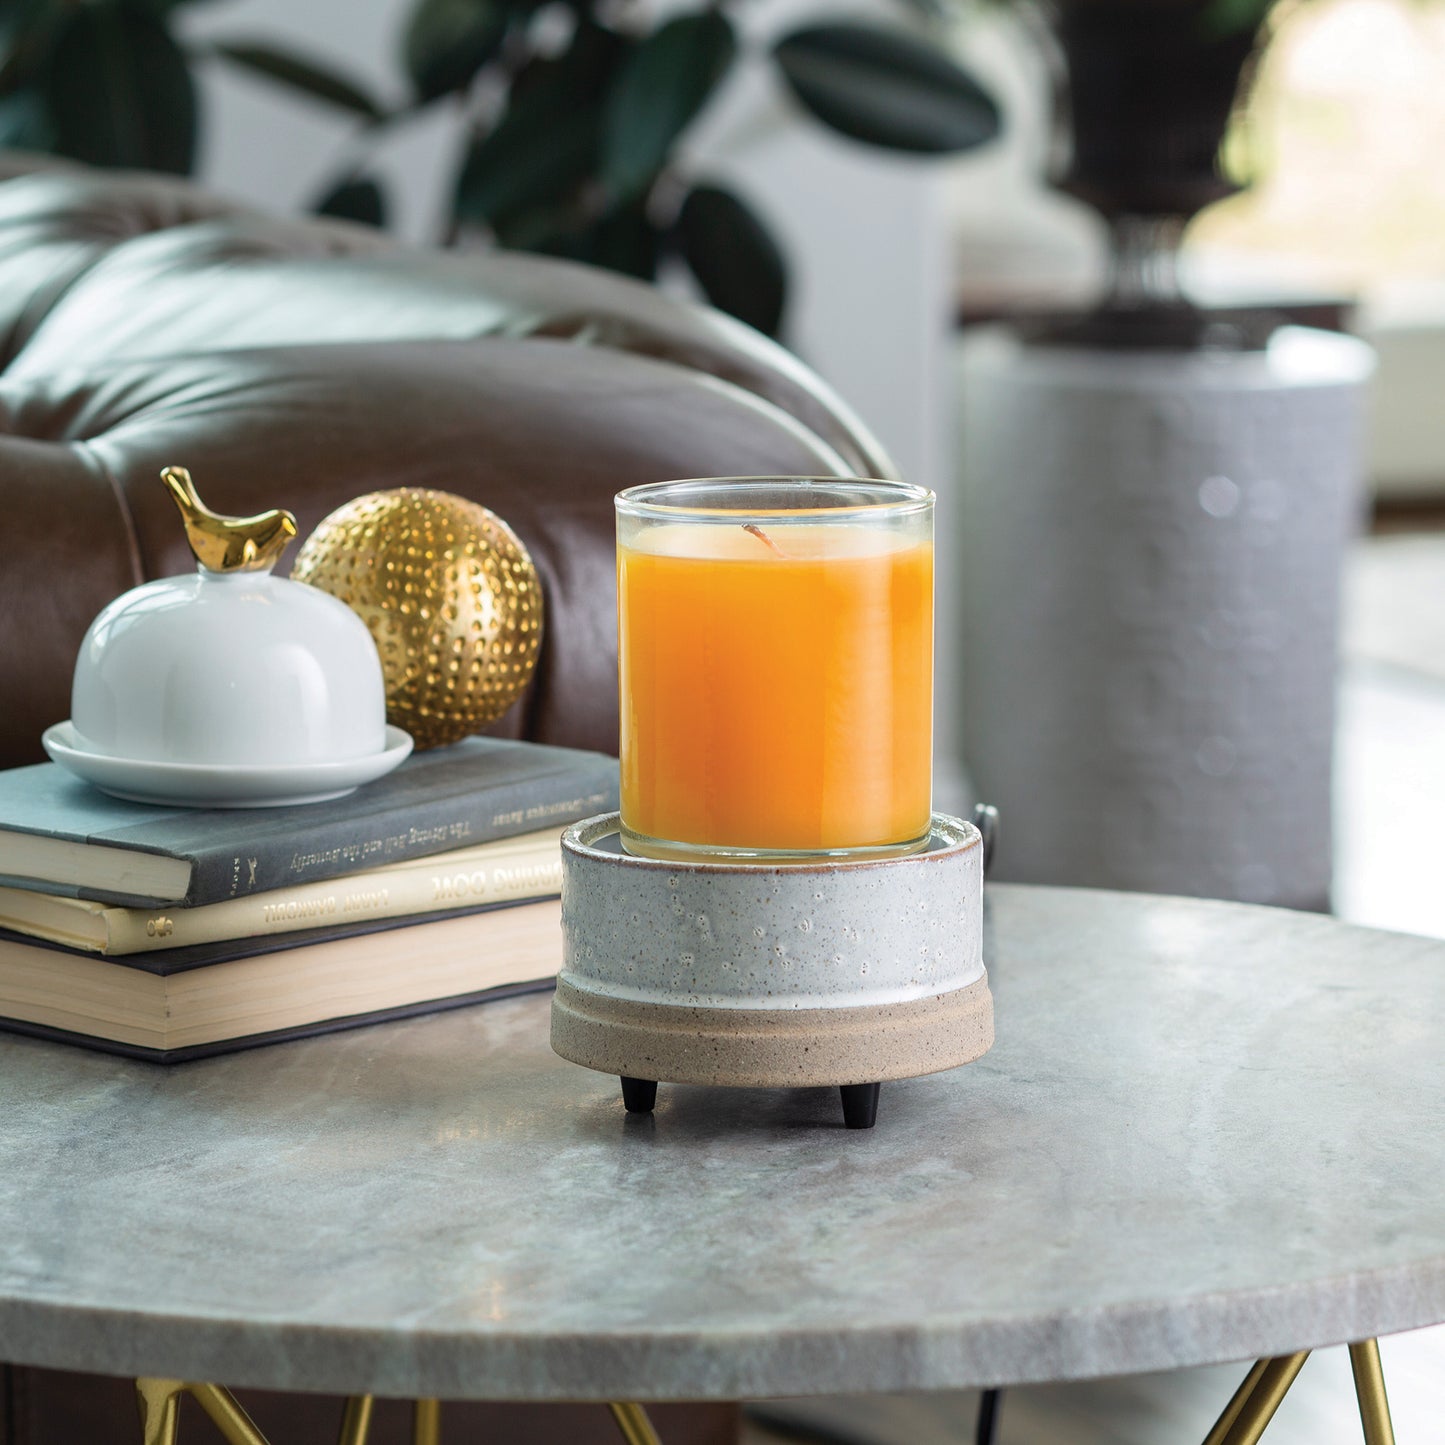 Rustic White: 2-in-1 Electric Wax Melt and Candle Warmer With an orange Candle | Happy Piranha